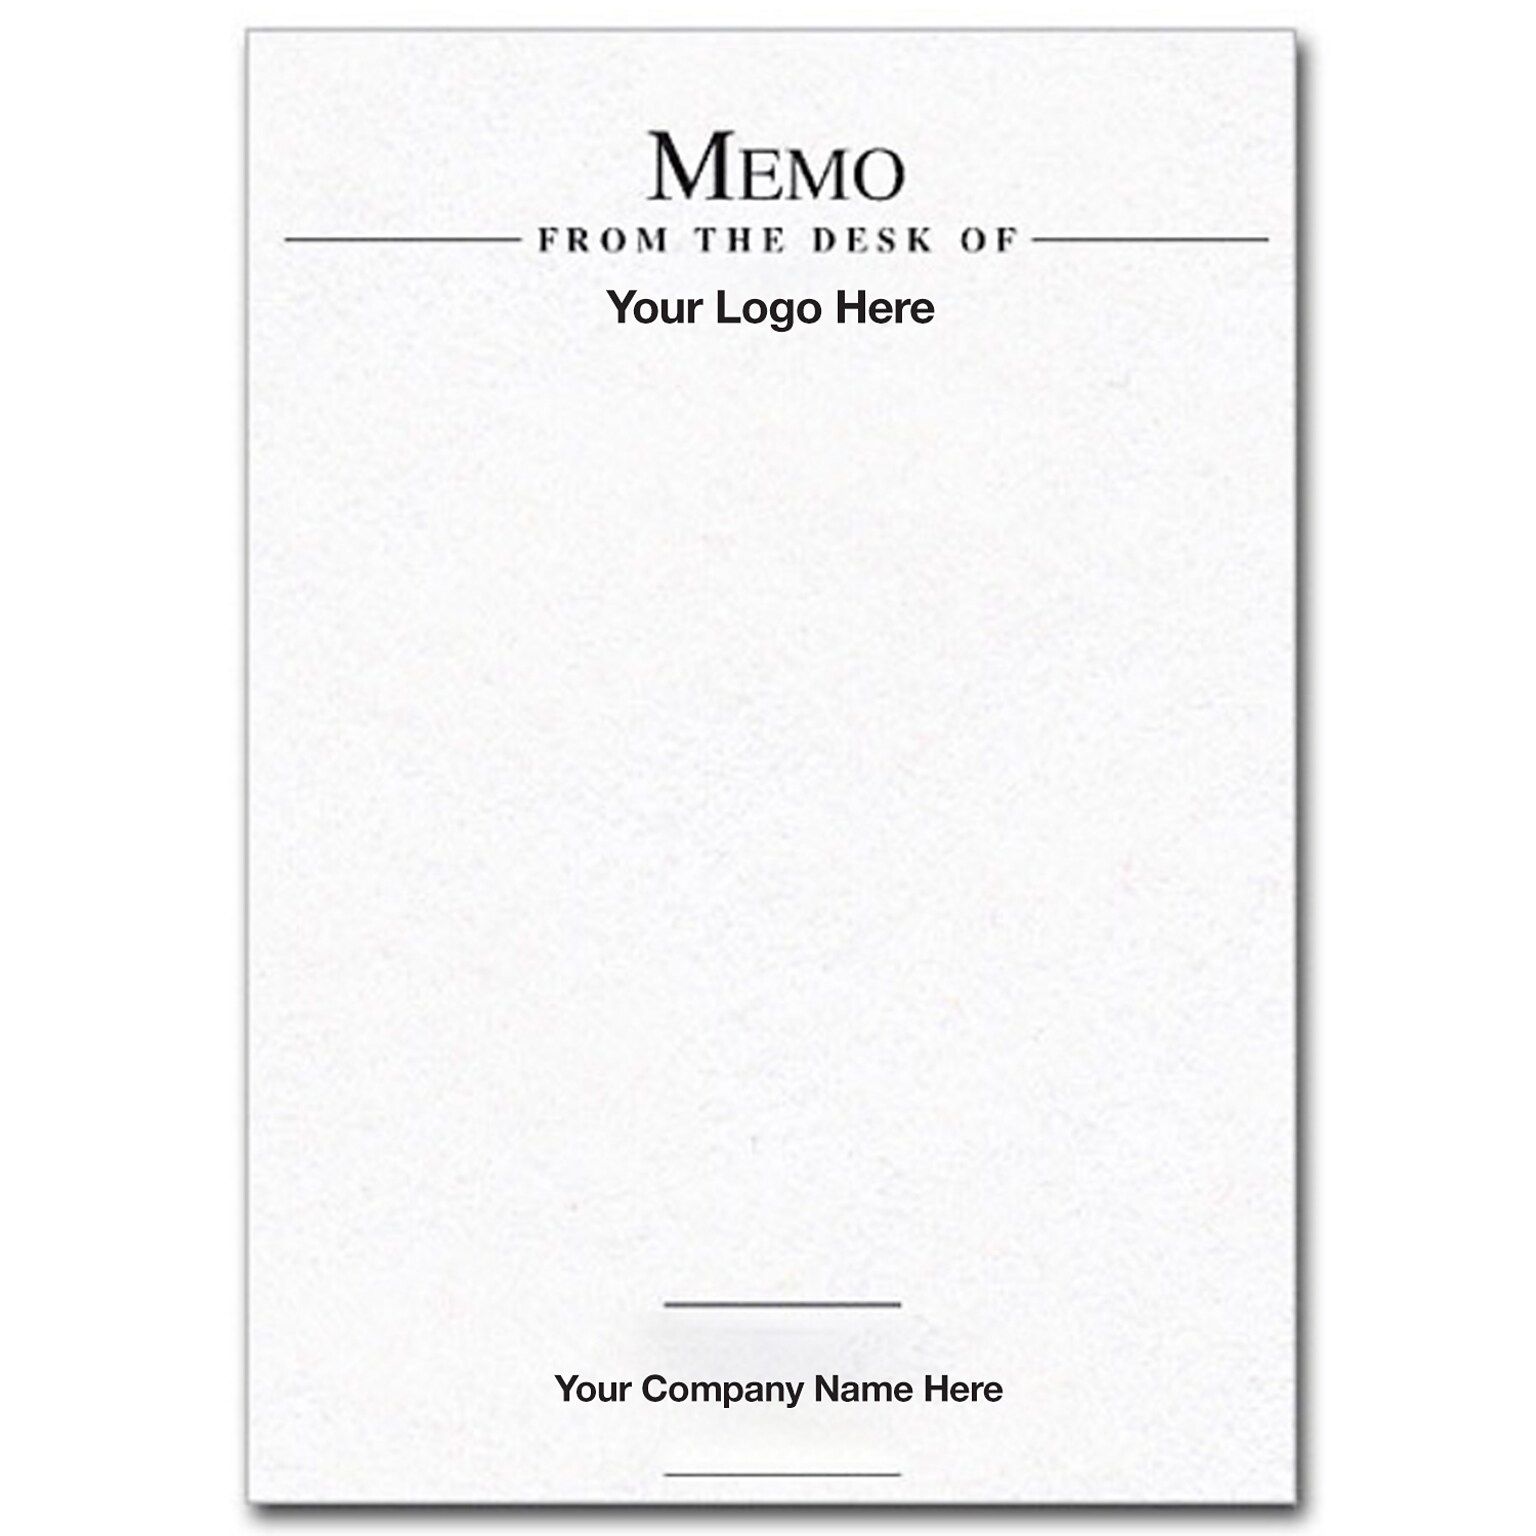 Custom Memo Pads, White Smooth 24# Text Stock, 4 x 5.5, 1 Standard Ink, Flat Ink, 100 Sheets per Pad